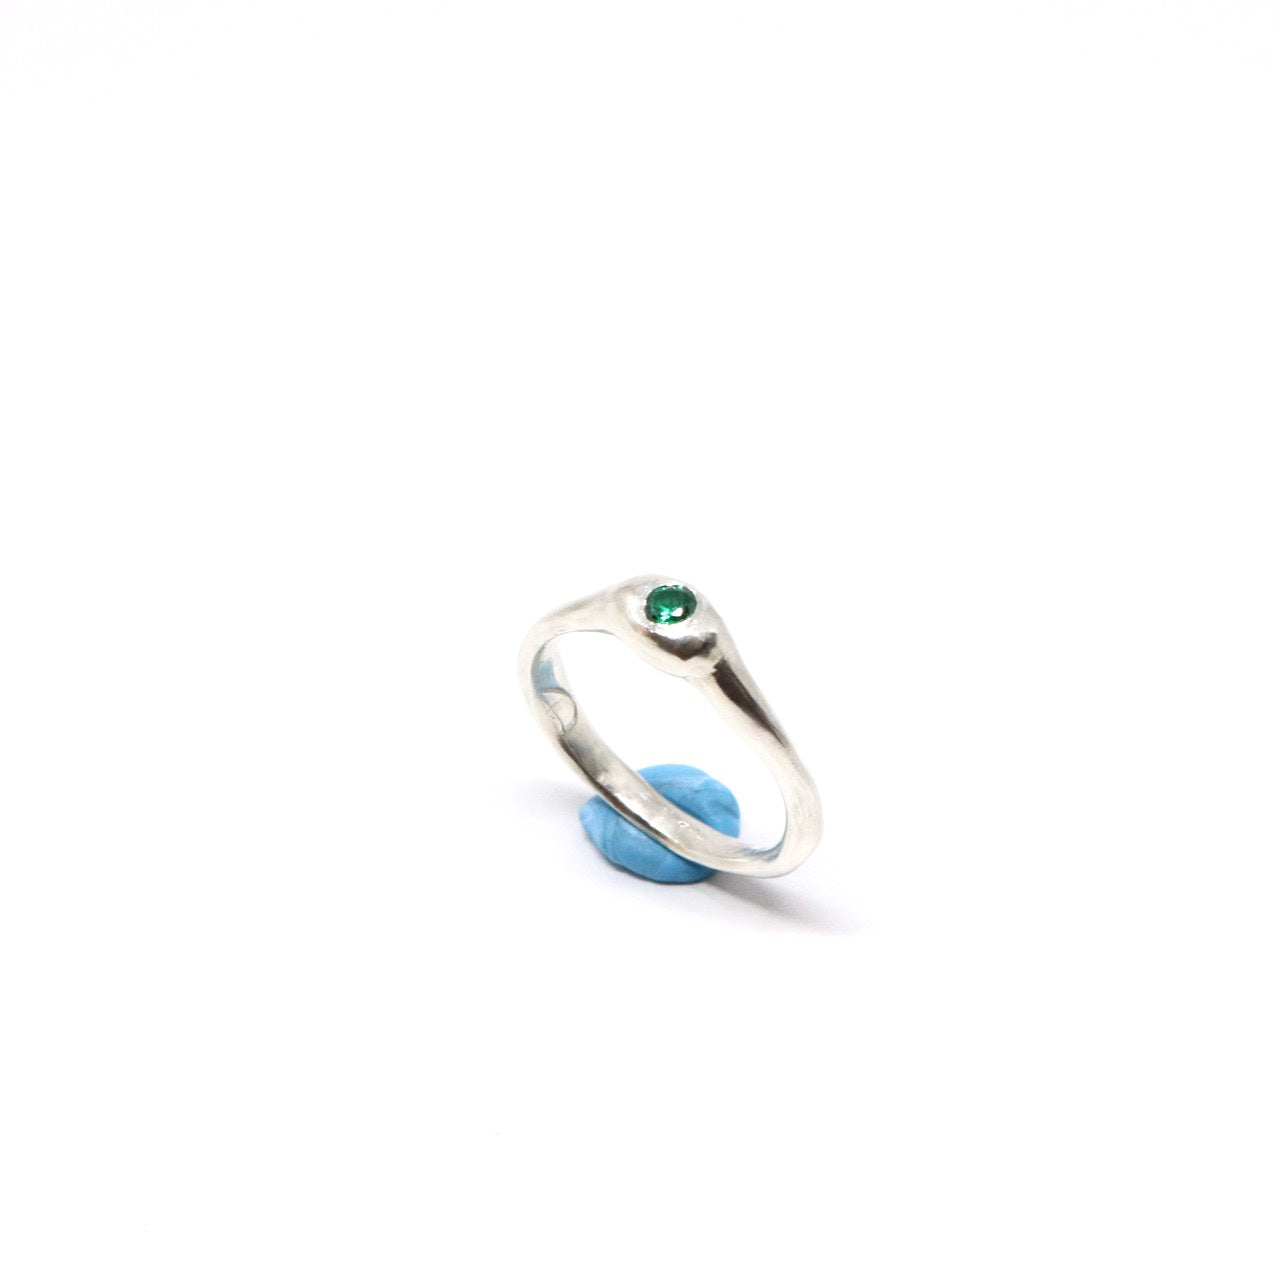 Wonky Ring - Sterling Silver & Emerald Green Cubic Zirconia (Size N) (R187)